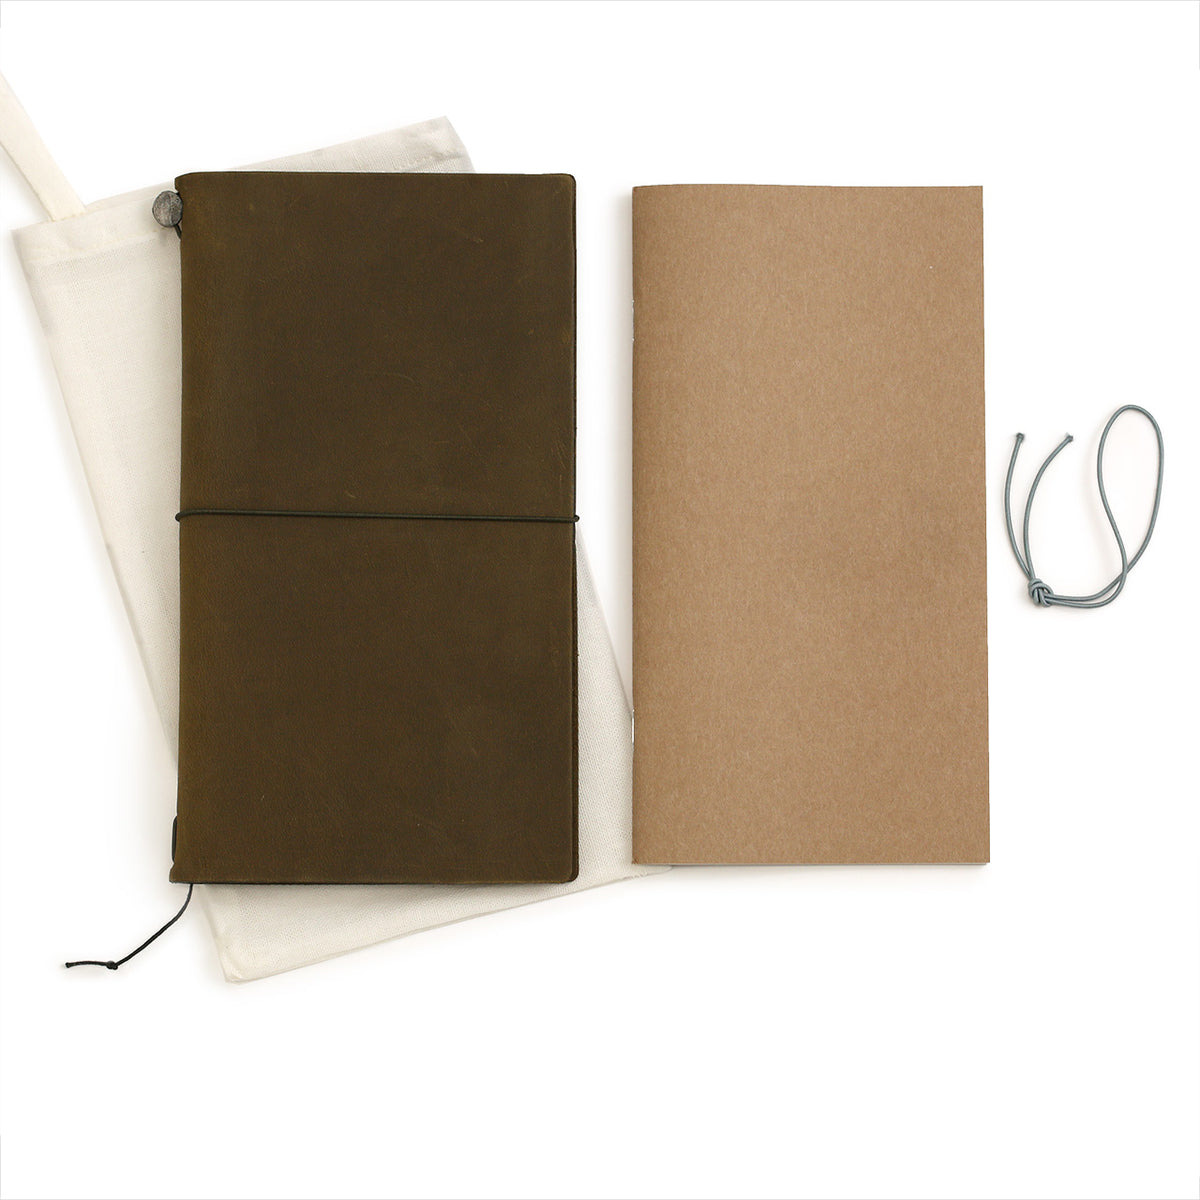 Cotton bag, brown leather notebook cover, refill book with kraft cover and spare elastic